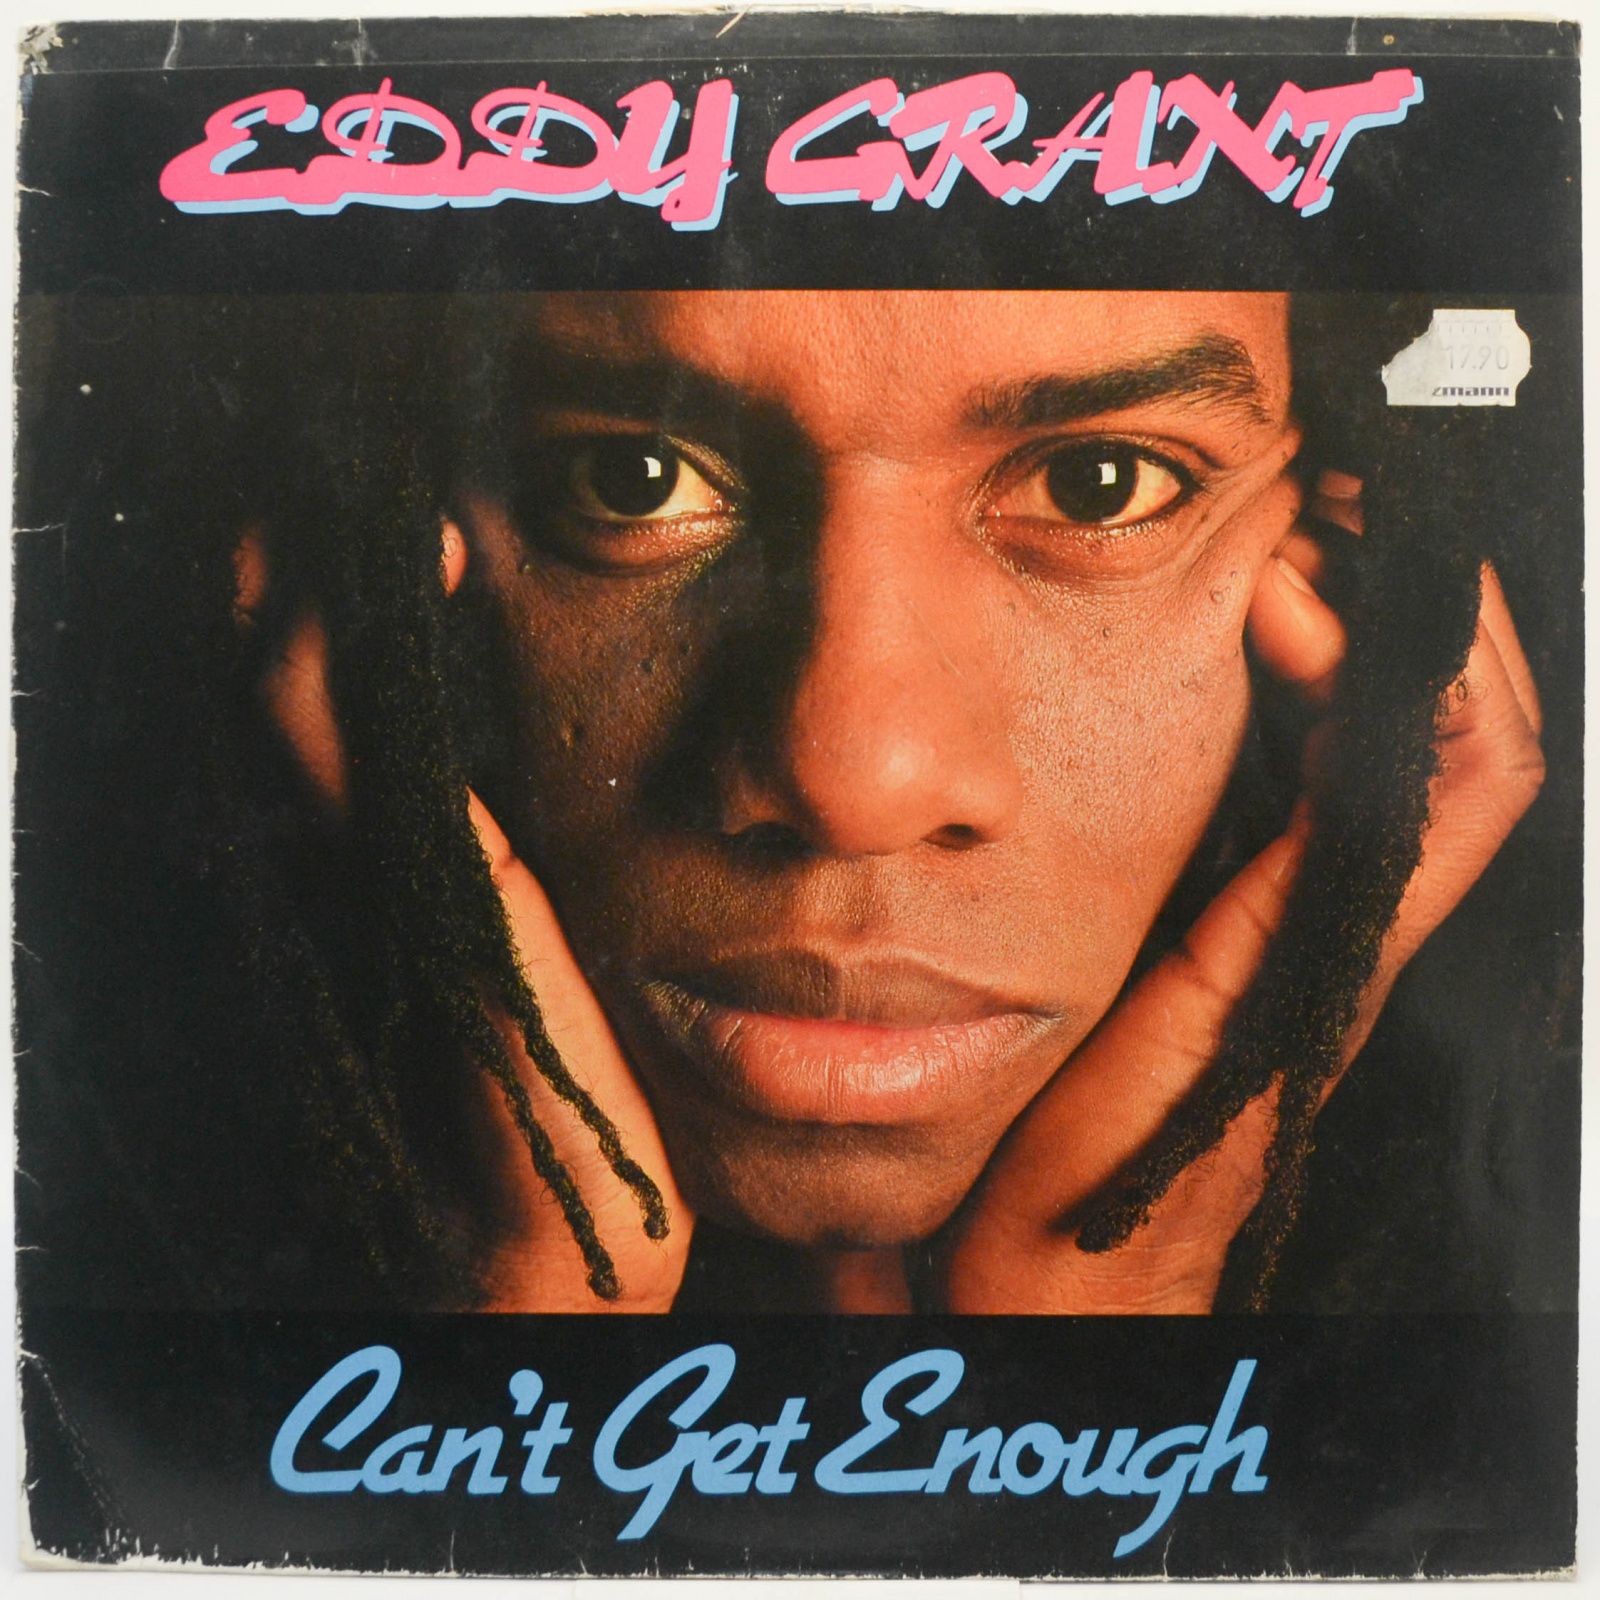 Can't Get Enough, 1981